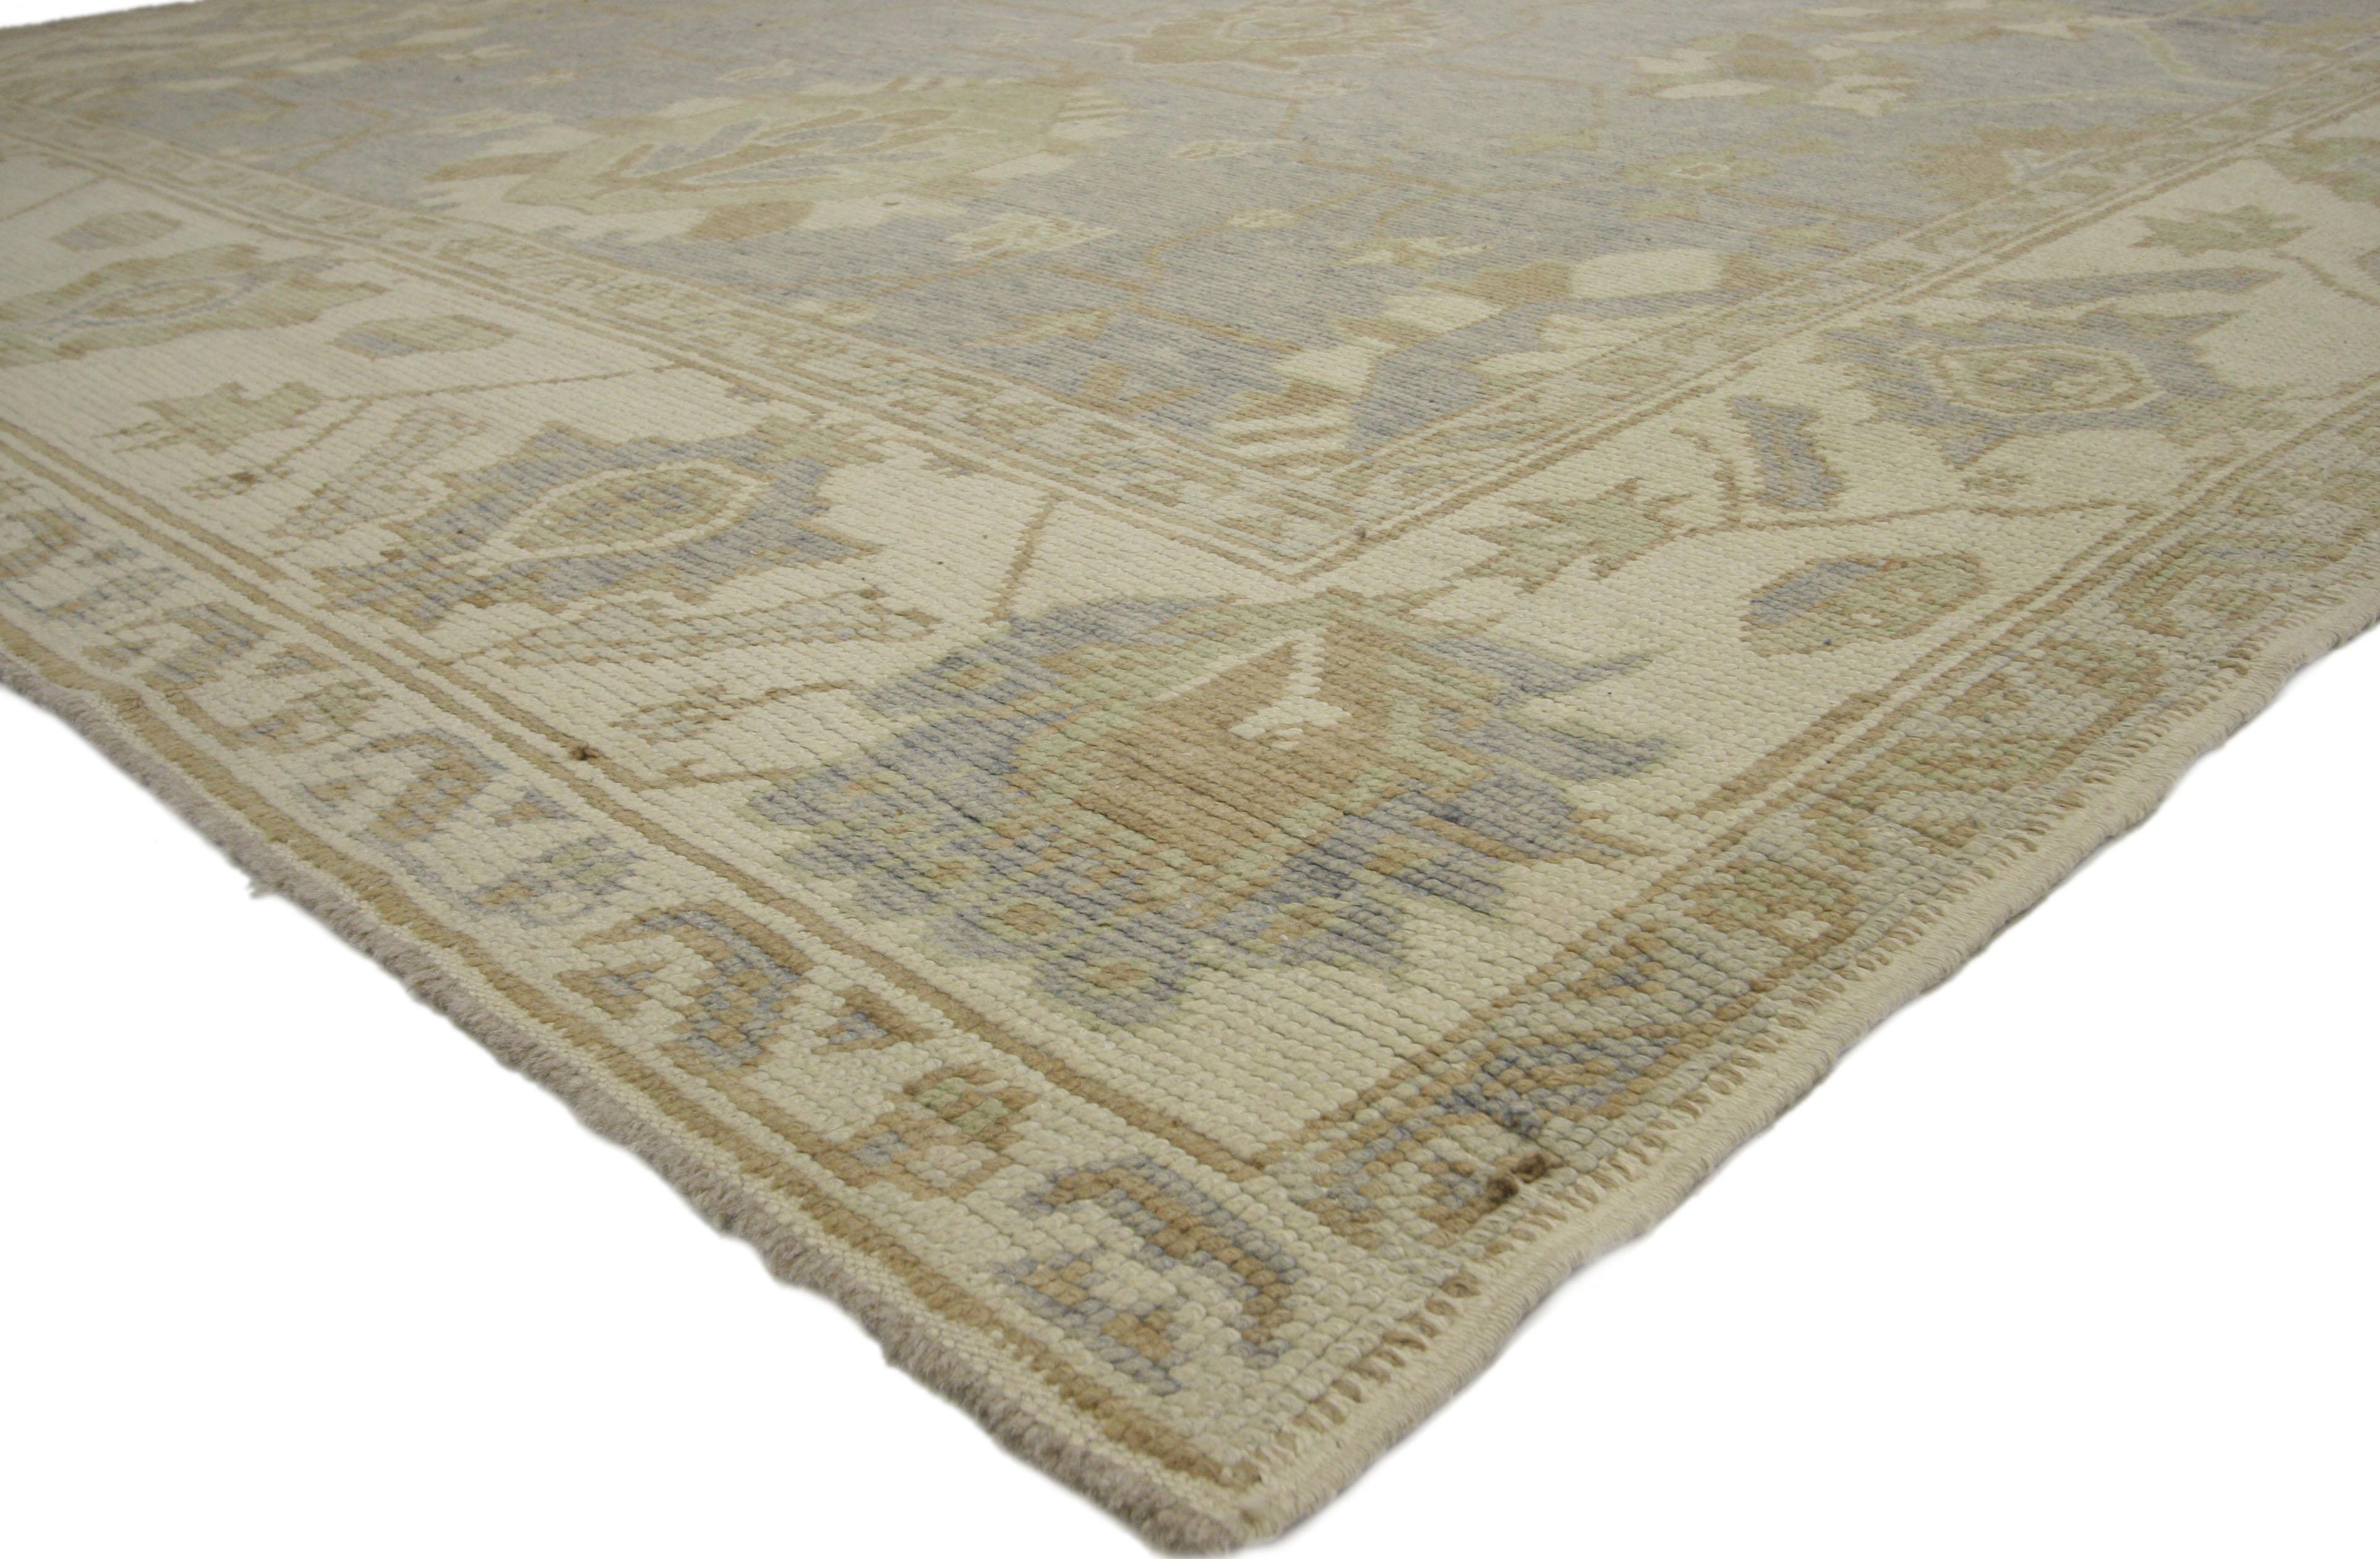 51620 New Turkish Oushak Rug, 09'03 x 12'00. Emanating timeless style with incredible detail and texture, this hand knotted wool Turkish Oushak rug is a captivating vision of woven beauty. The traditional design and neutral colorway woven into this